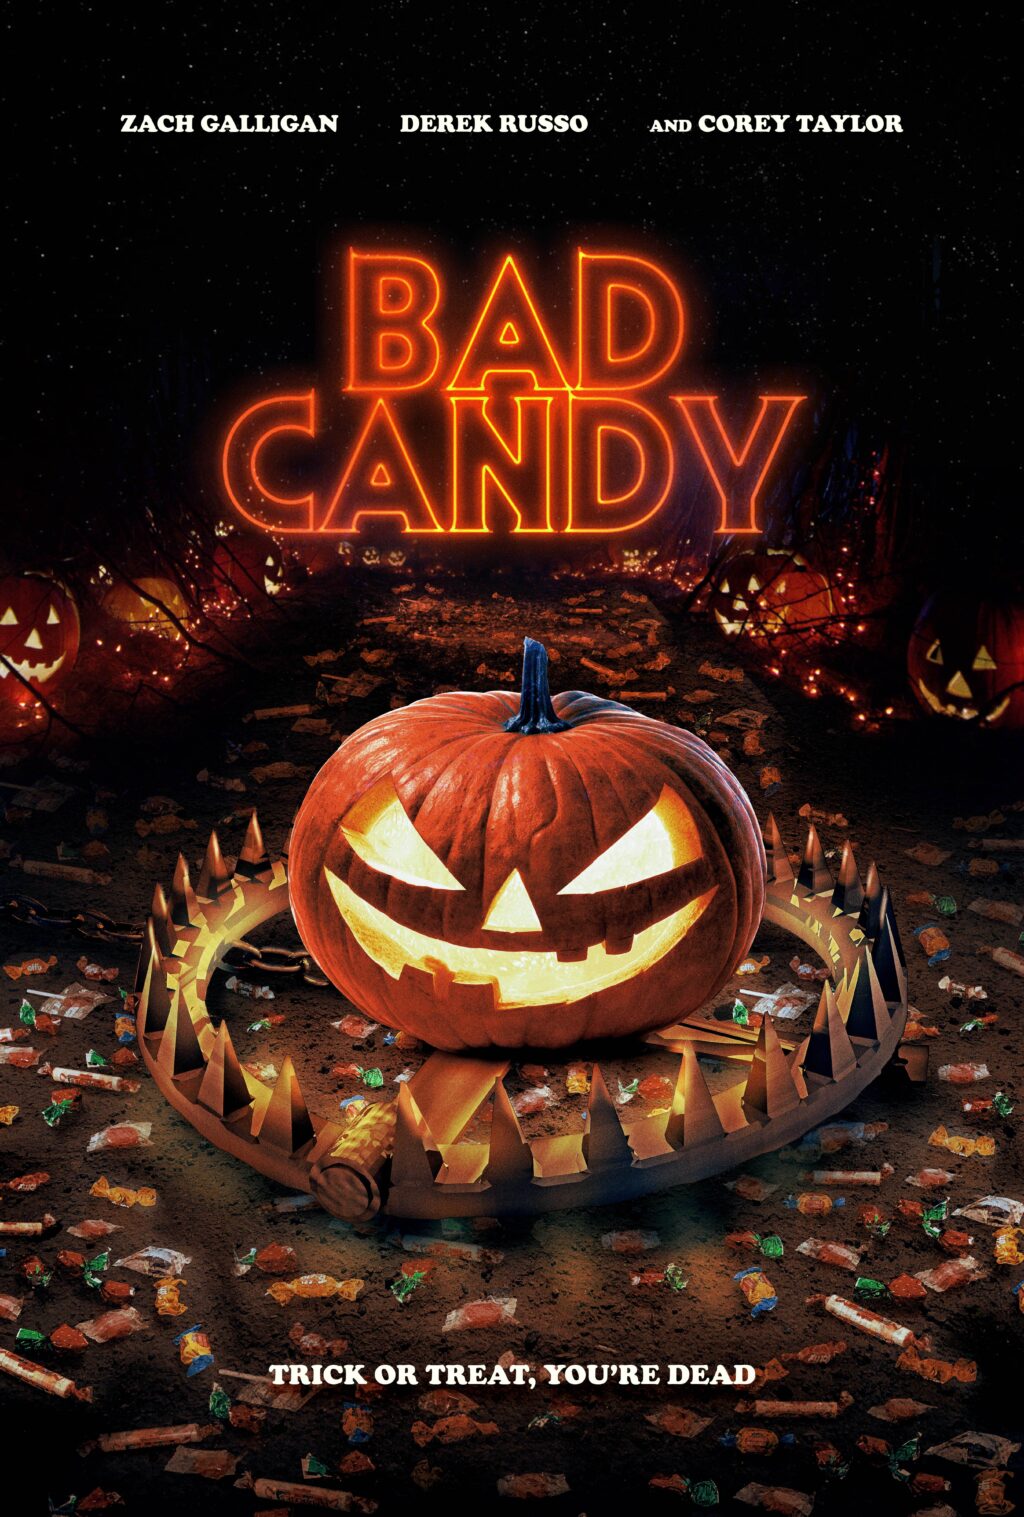 Bad Candy KeyArt Final 1024x1517 - Watch the Trailer for DREAD's Next Terrifying Release 'Bad Candy'!